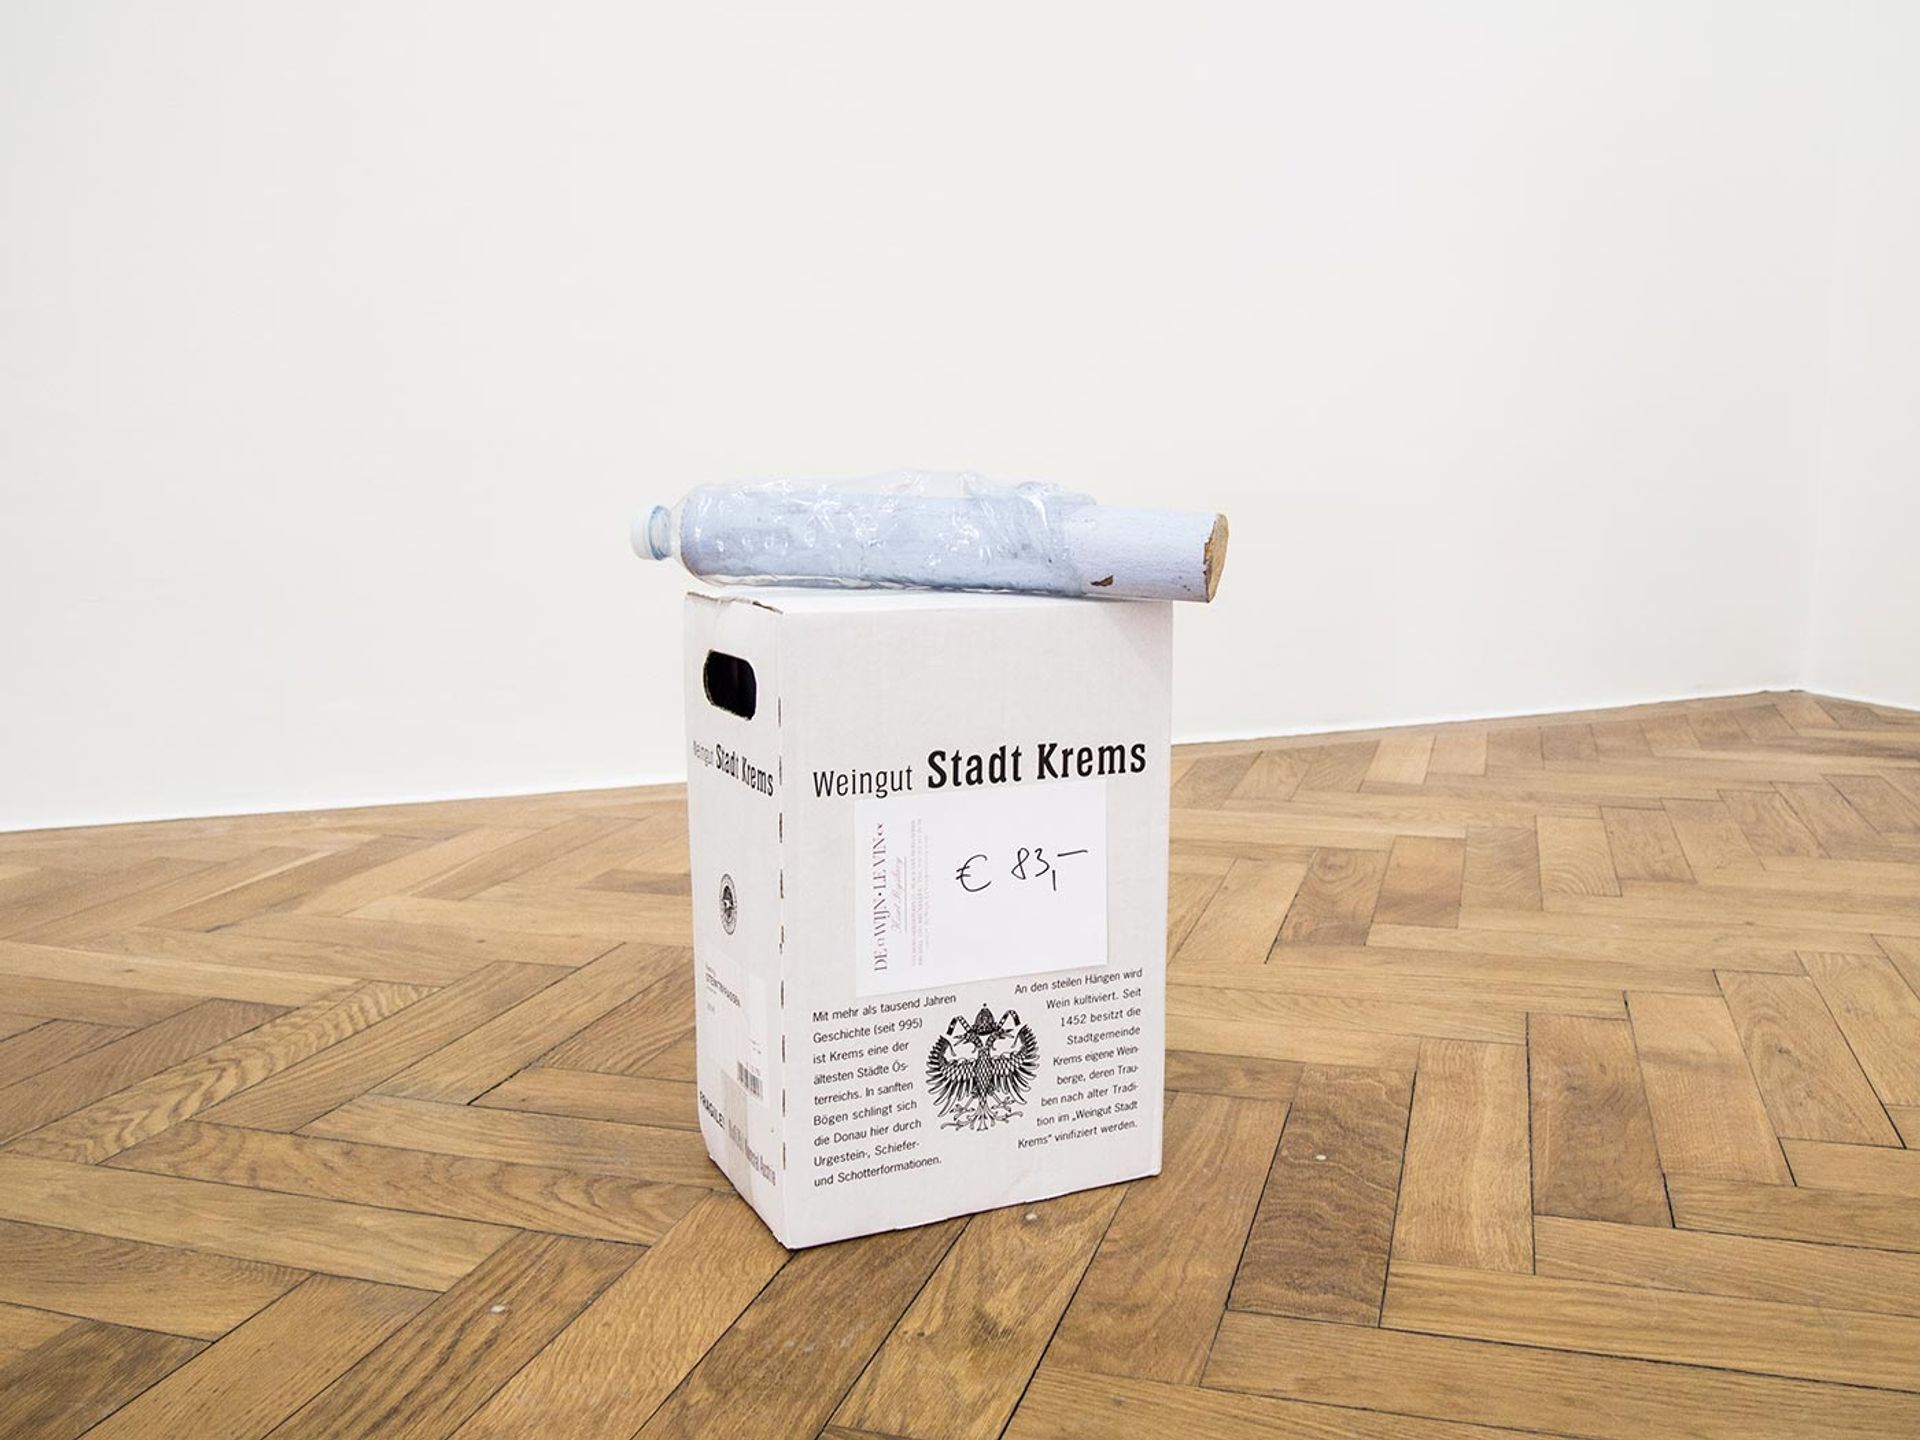 Kurt Ryslavy, Immersive Environment, Box of 6 bottles wine and object, dimensions variable